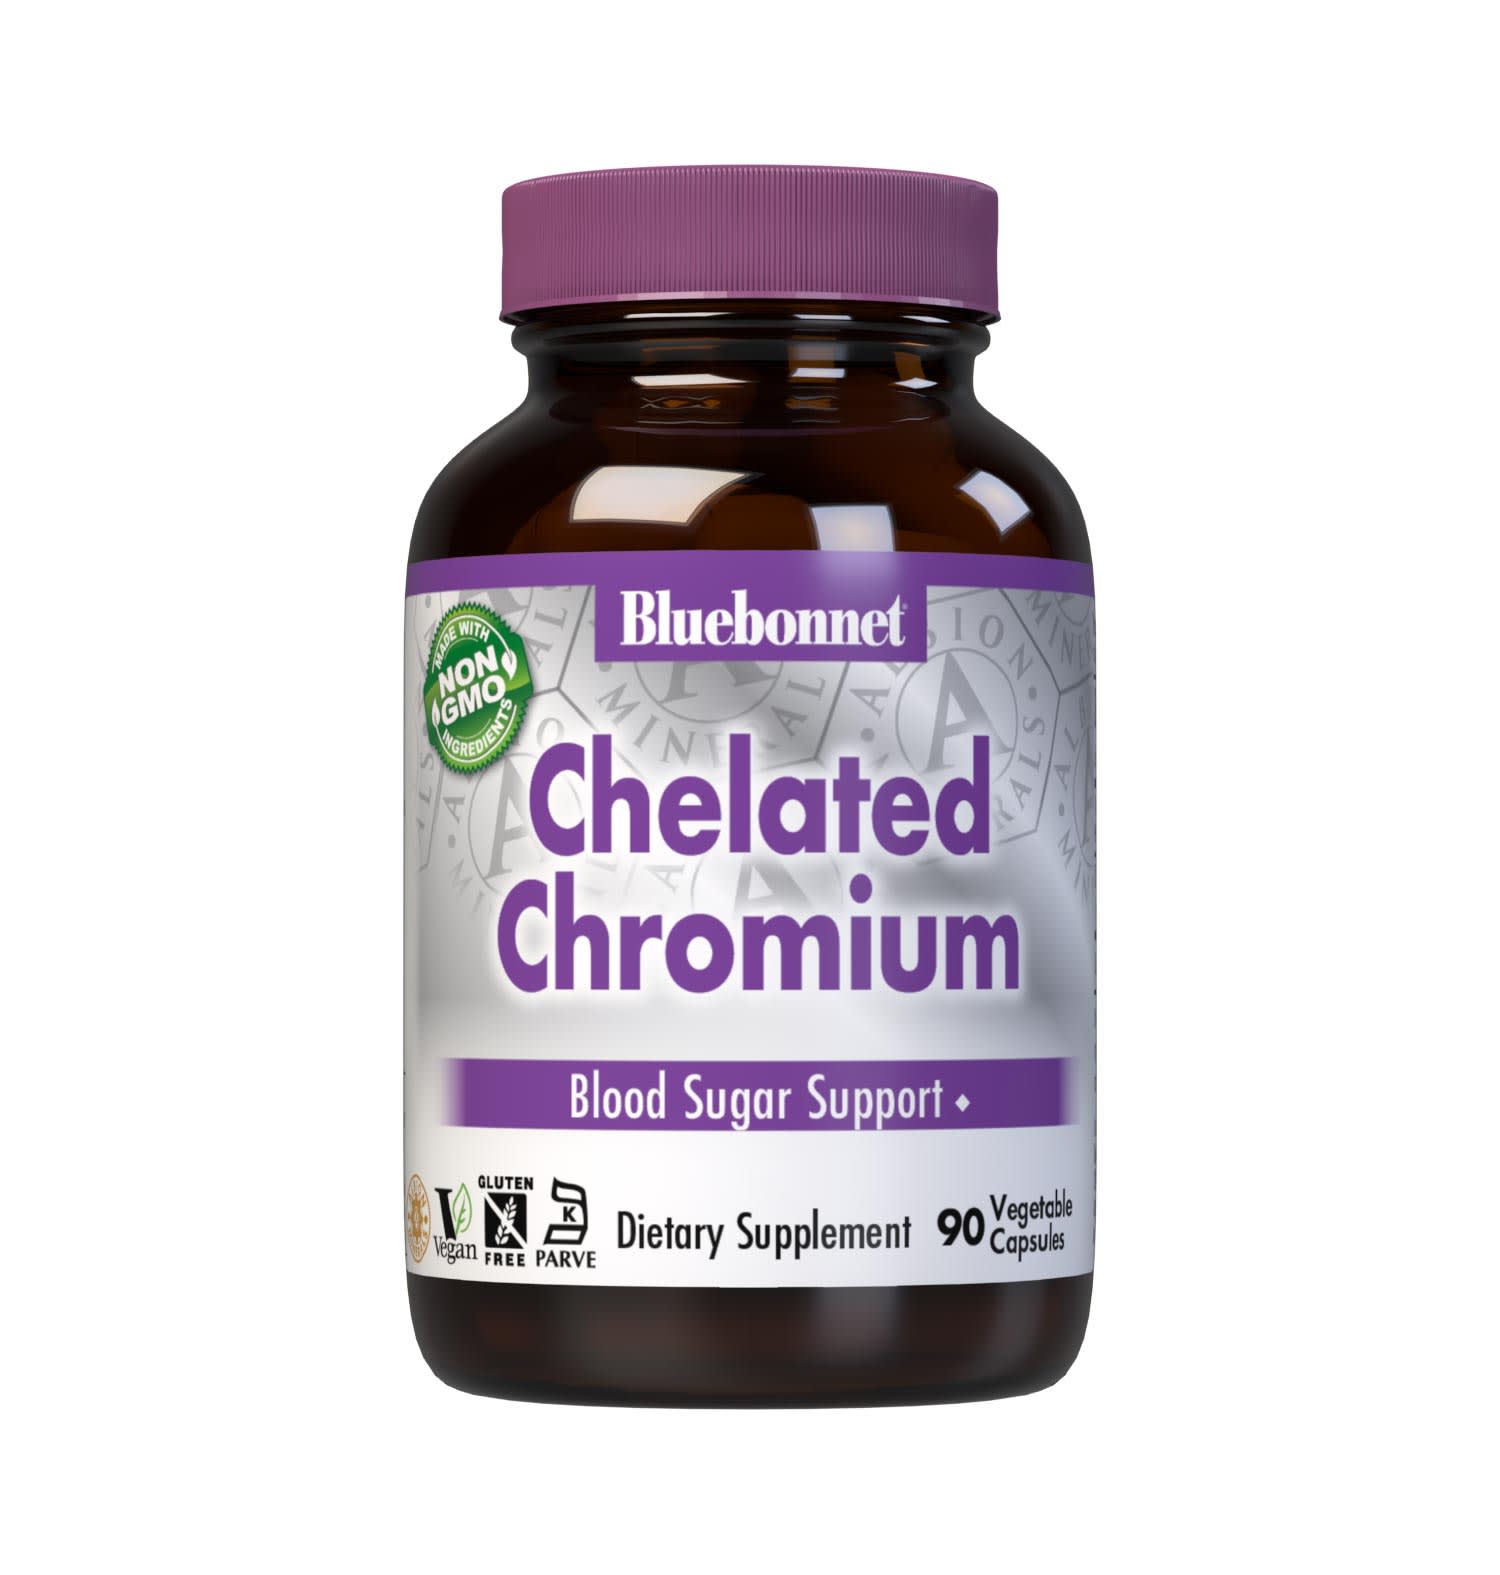 Bluebonnet's Yeast-Free Chelated Chromium 90 Vegetable Capsules are formulated with 200 mcg of elemental chromium from fully reacted chromium nicotinate glycinate, an amino acid chelate mineral from Albion. Chromium is an essential element that is necessary for blood sugar control and carbohydrate metabolism #size_90 count